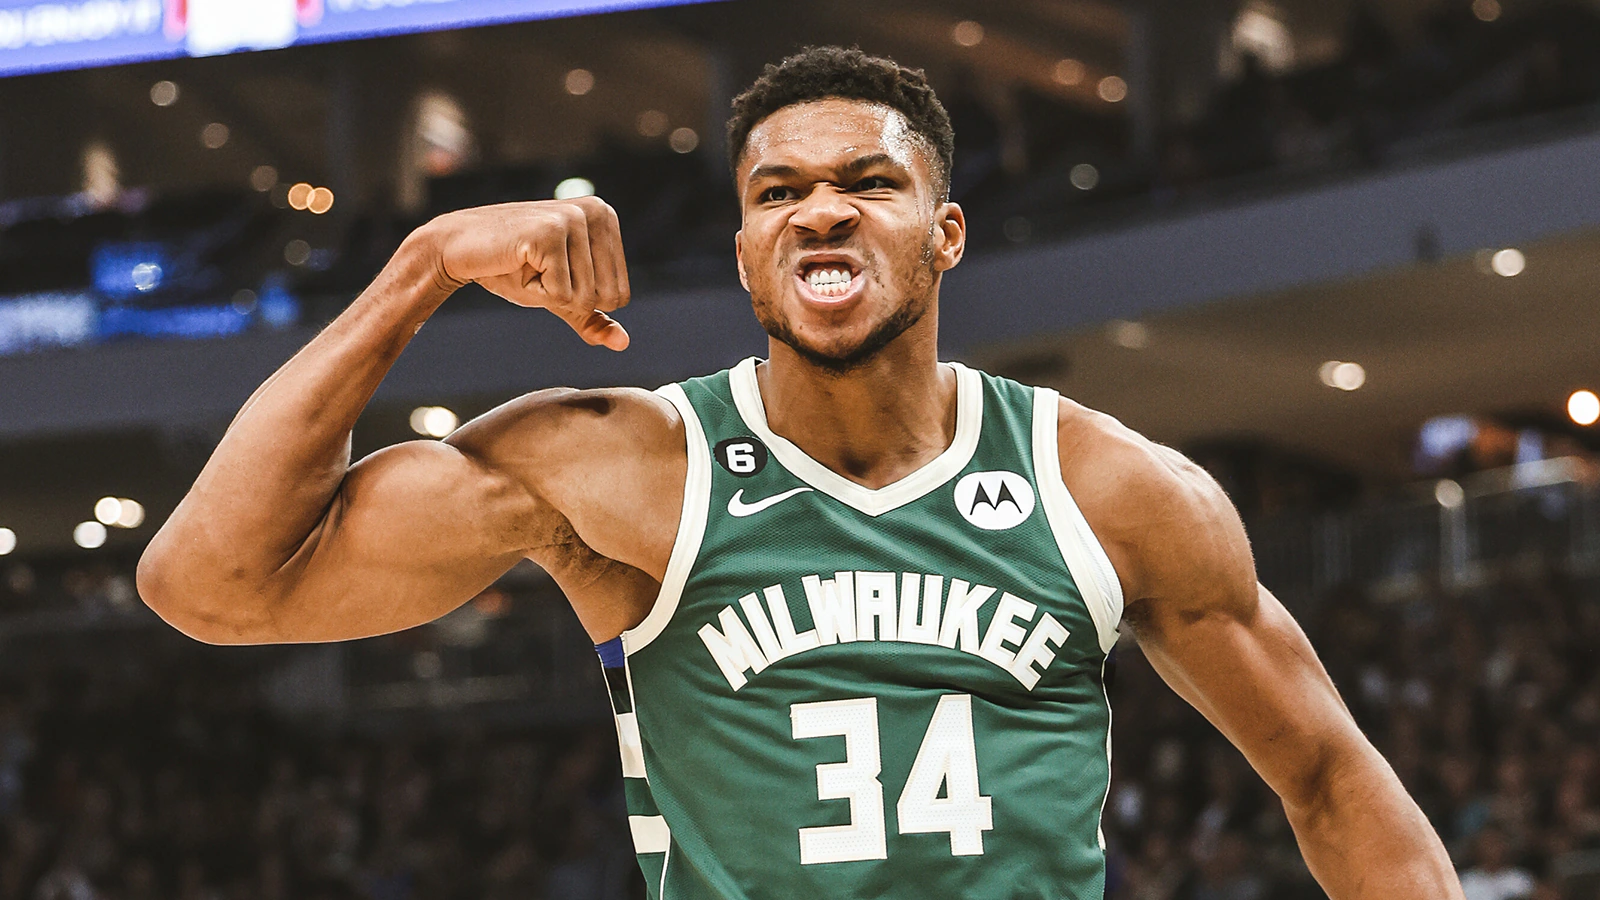 Giannis Antetokounmpo Trade Rumors: Could the Oklahoma City Thunder Land the NBA Superstar with their Massive Draft Capital?